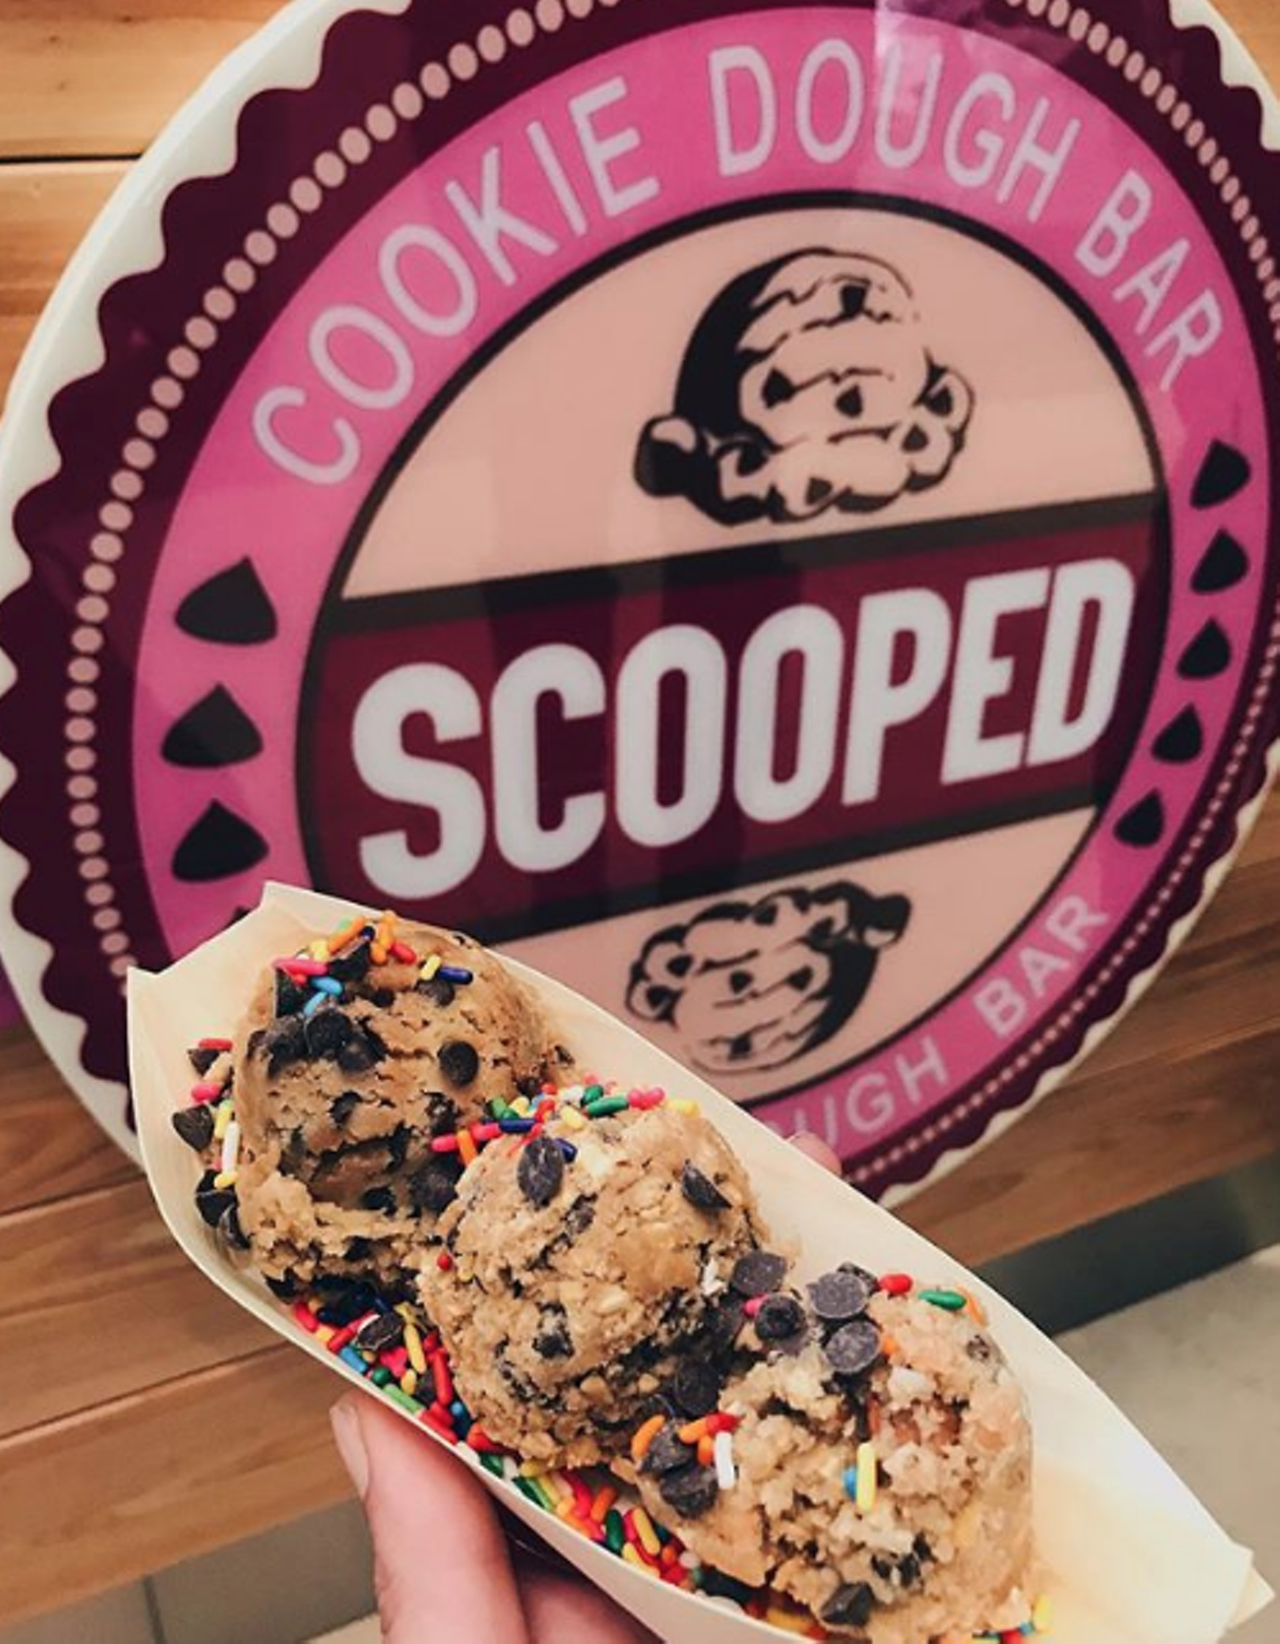 Scooped Cookie Dough Bar
15900 La Cantera Pkwy #2201, (512) 943-2883, scoopedcookiedoughbar.com
Tired of being told that raw cookie dough is bad for you? Block out the haters and head to Scooped to get your fill of this goodness. With a location at La Cantera, consider this a treat to enjoy during a day of shopping. Choose from common cookie flavors to special finds like Mexican hot chocolate and cake batter.
Photo via Instagram / katieallstarosta